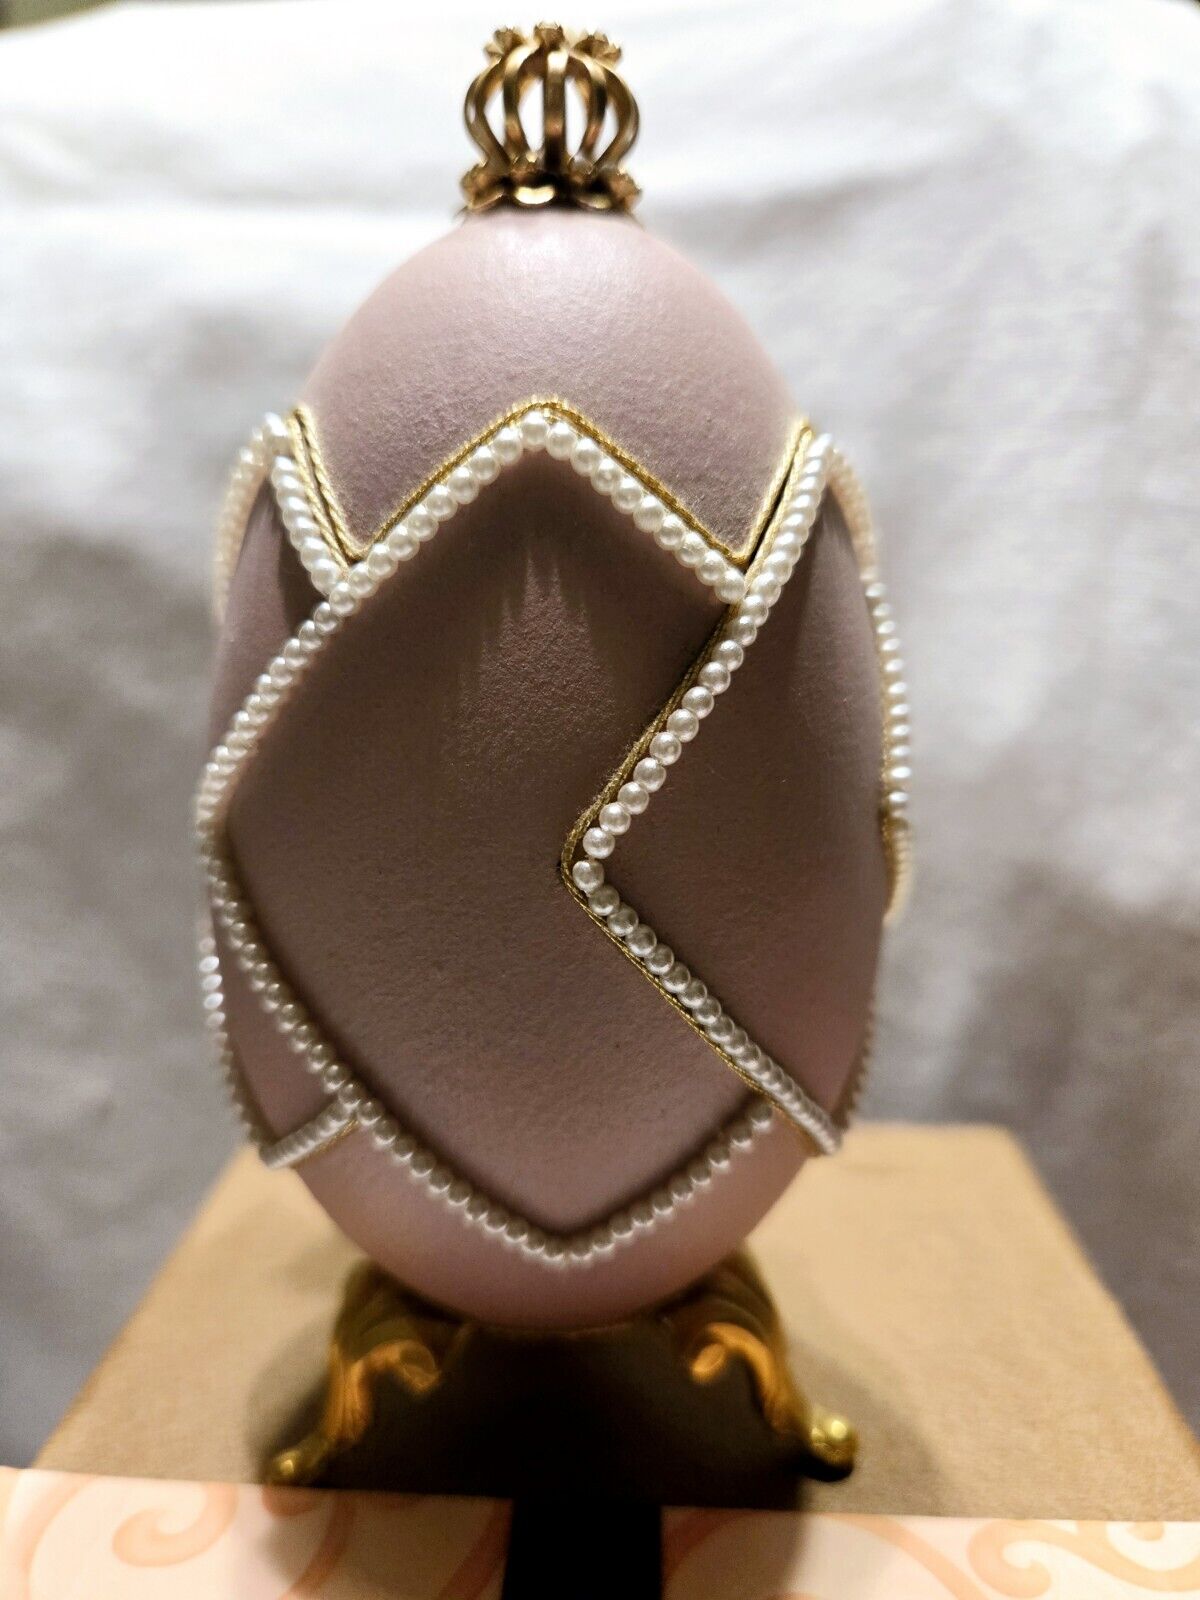 RARE June Recchia Signed, Pastel Pink, Pearls & Gold Faberge Inspired Egg 5.5’’